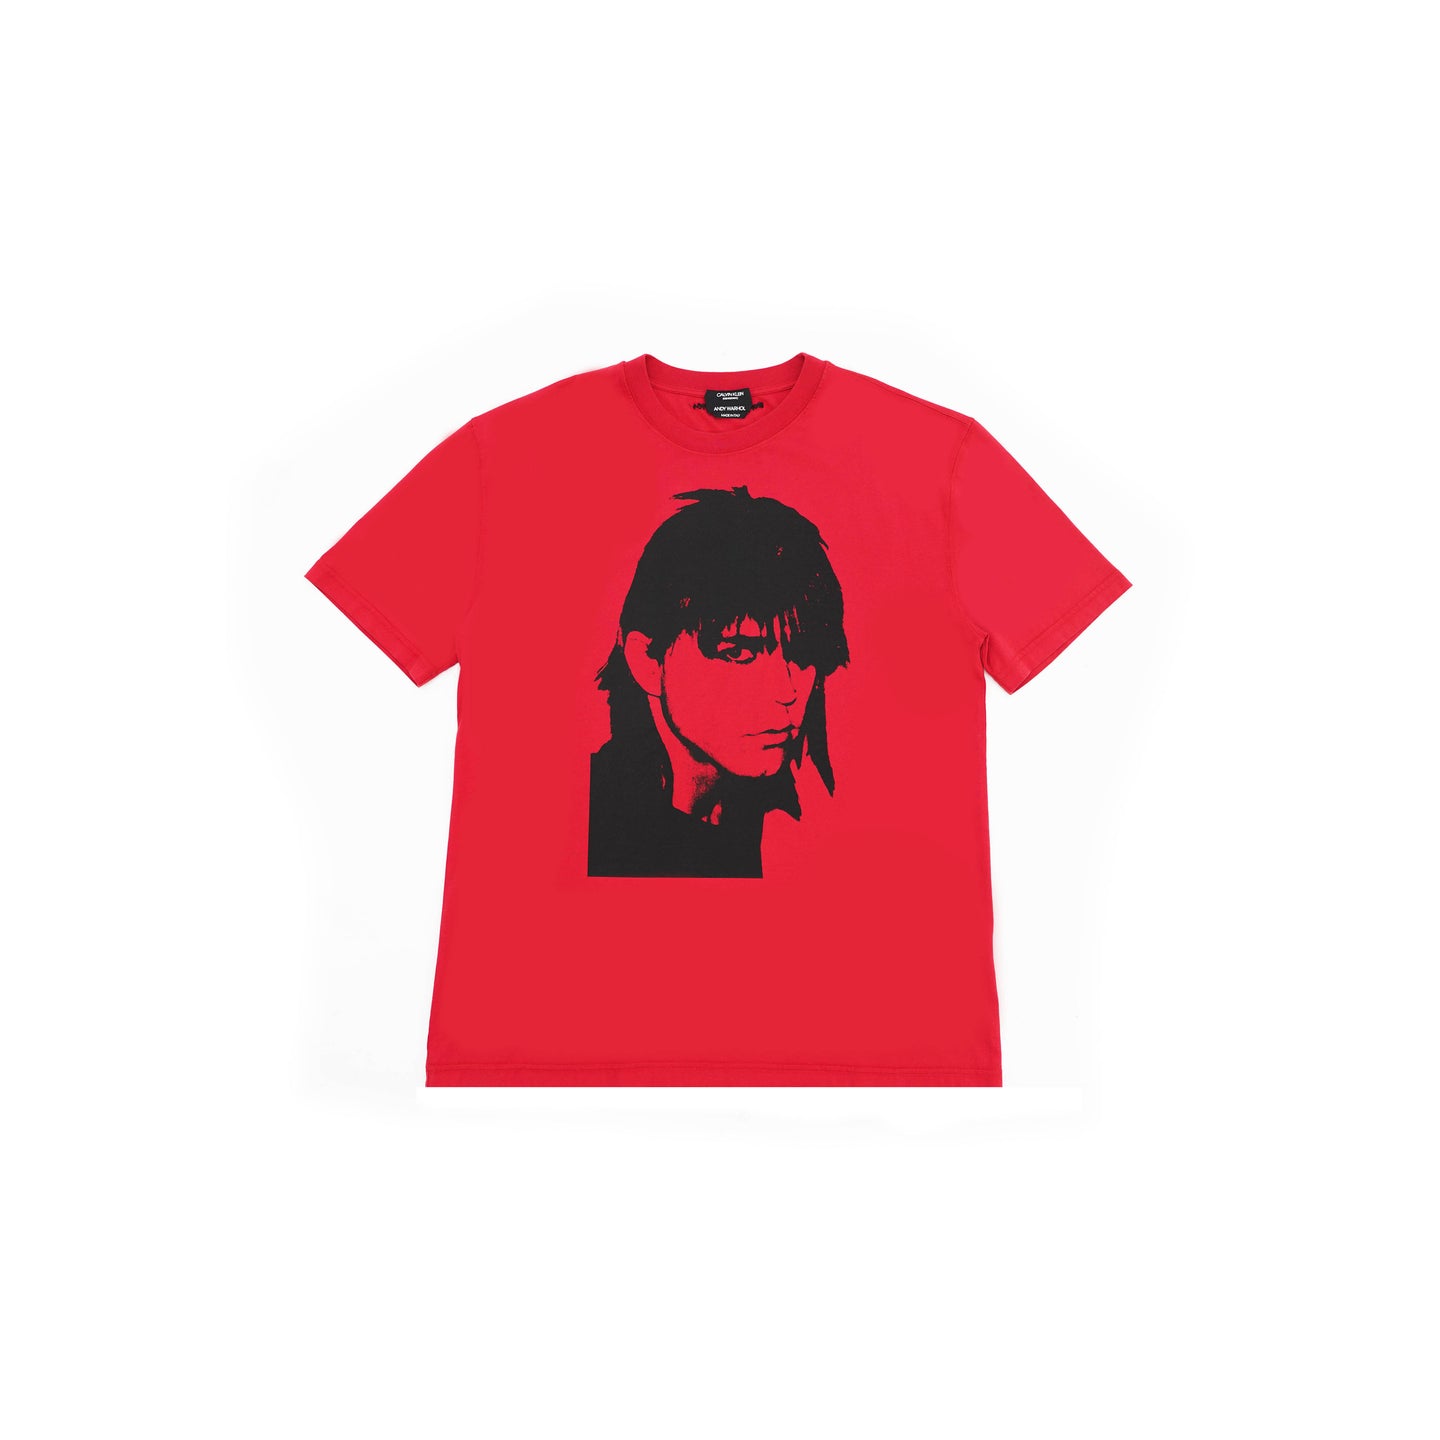 Steven Sprouse by Andy Warhol T-Shirt